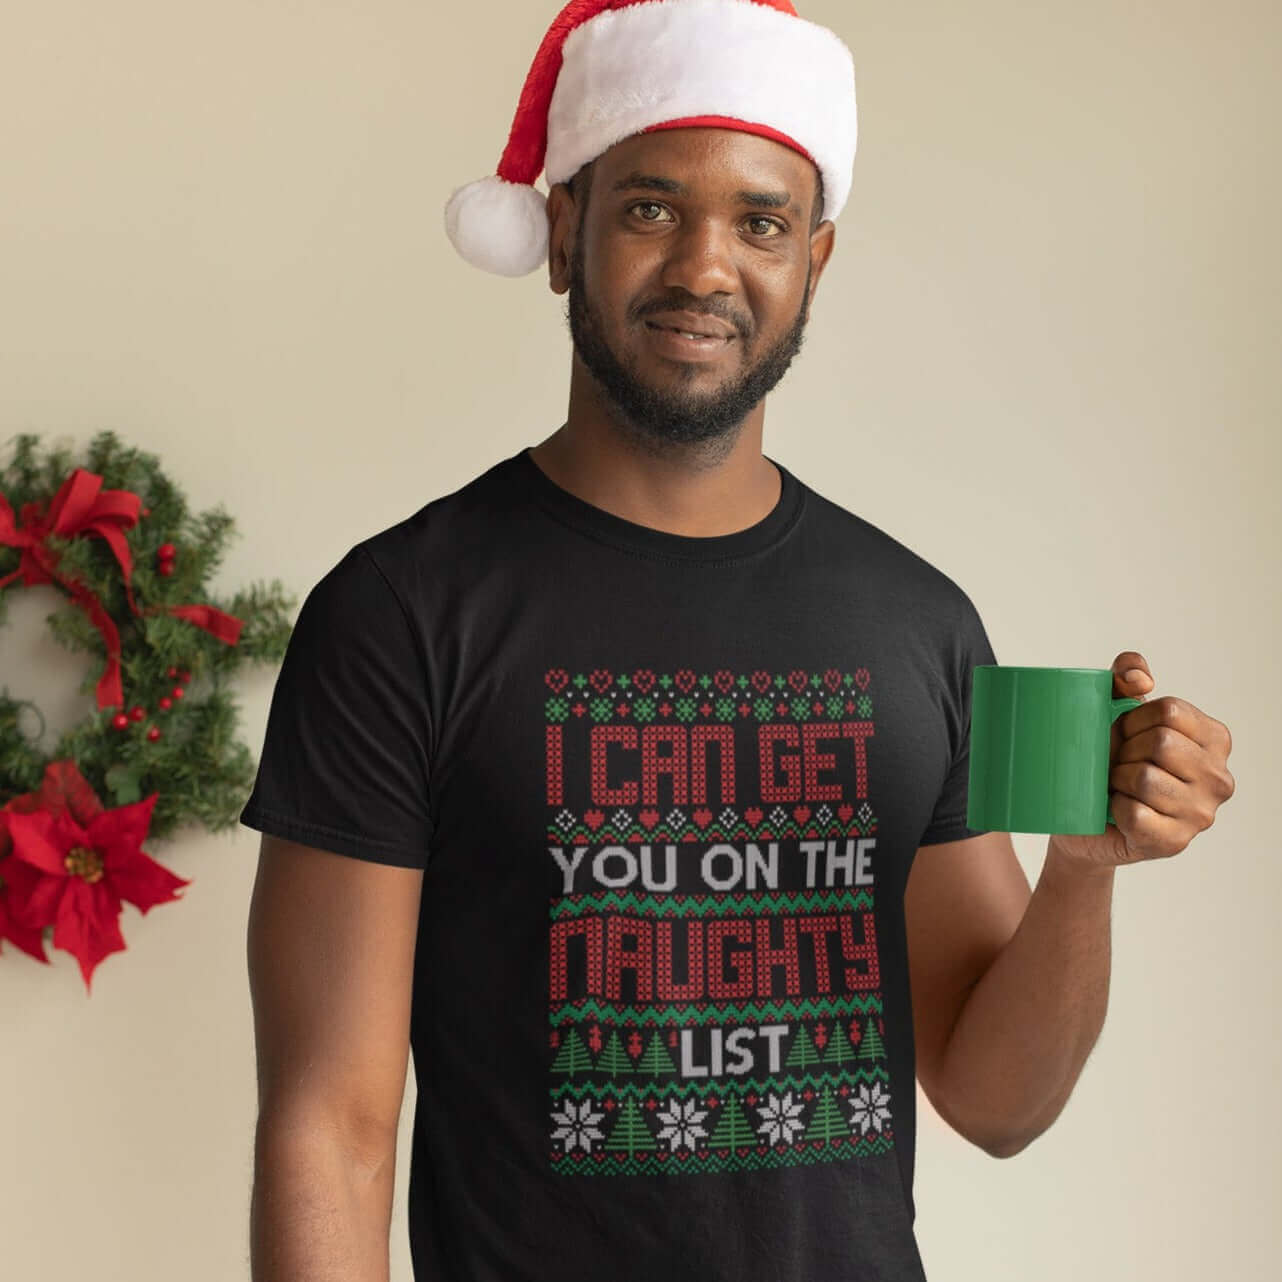 Man wearing santa hat wearing black t-shirt with the words I can get you on the naught list printed on the front. 